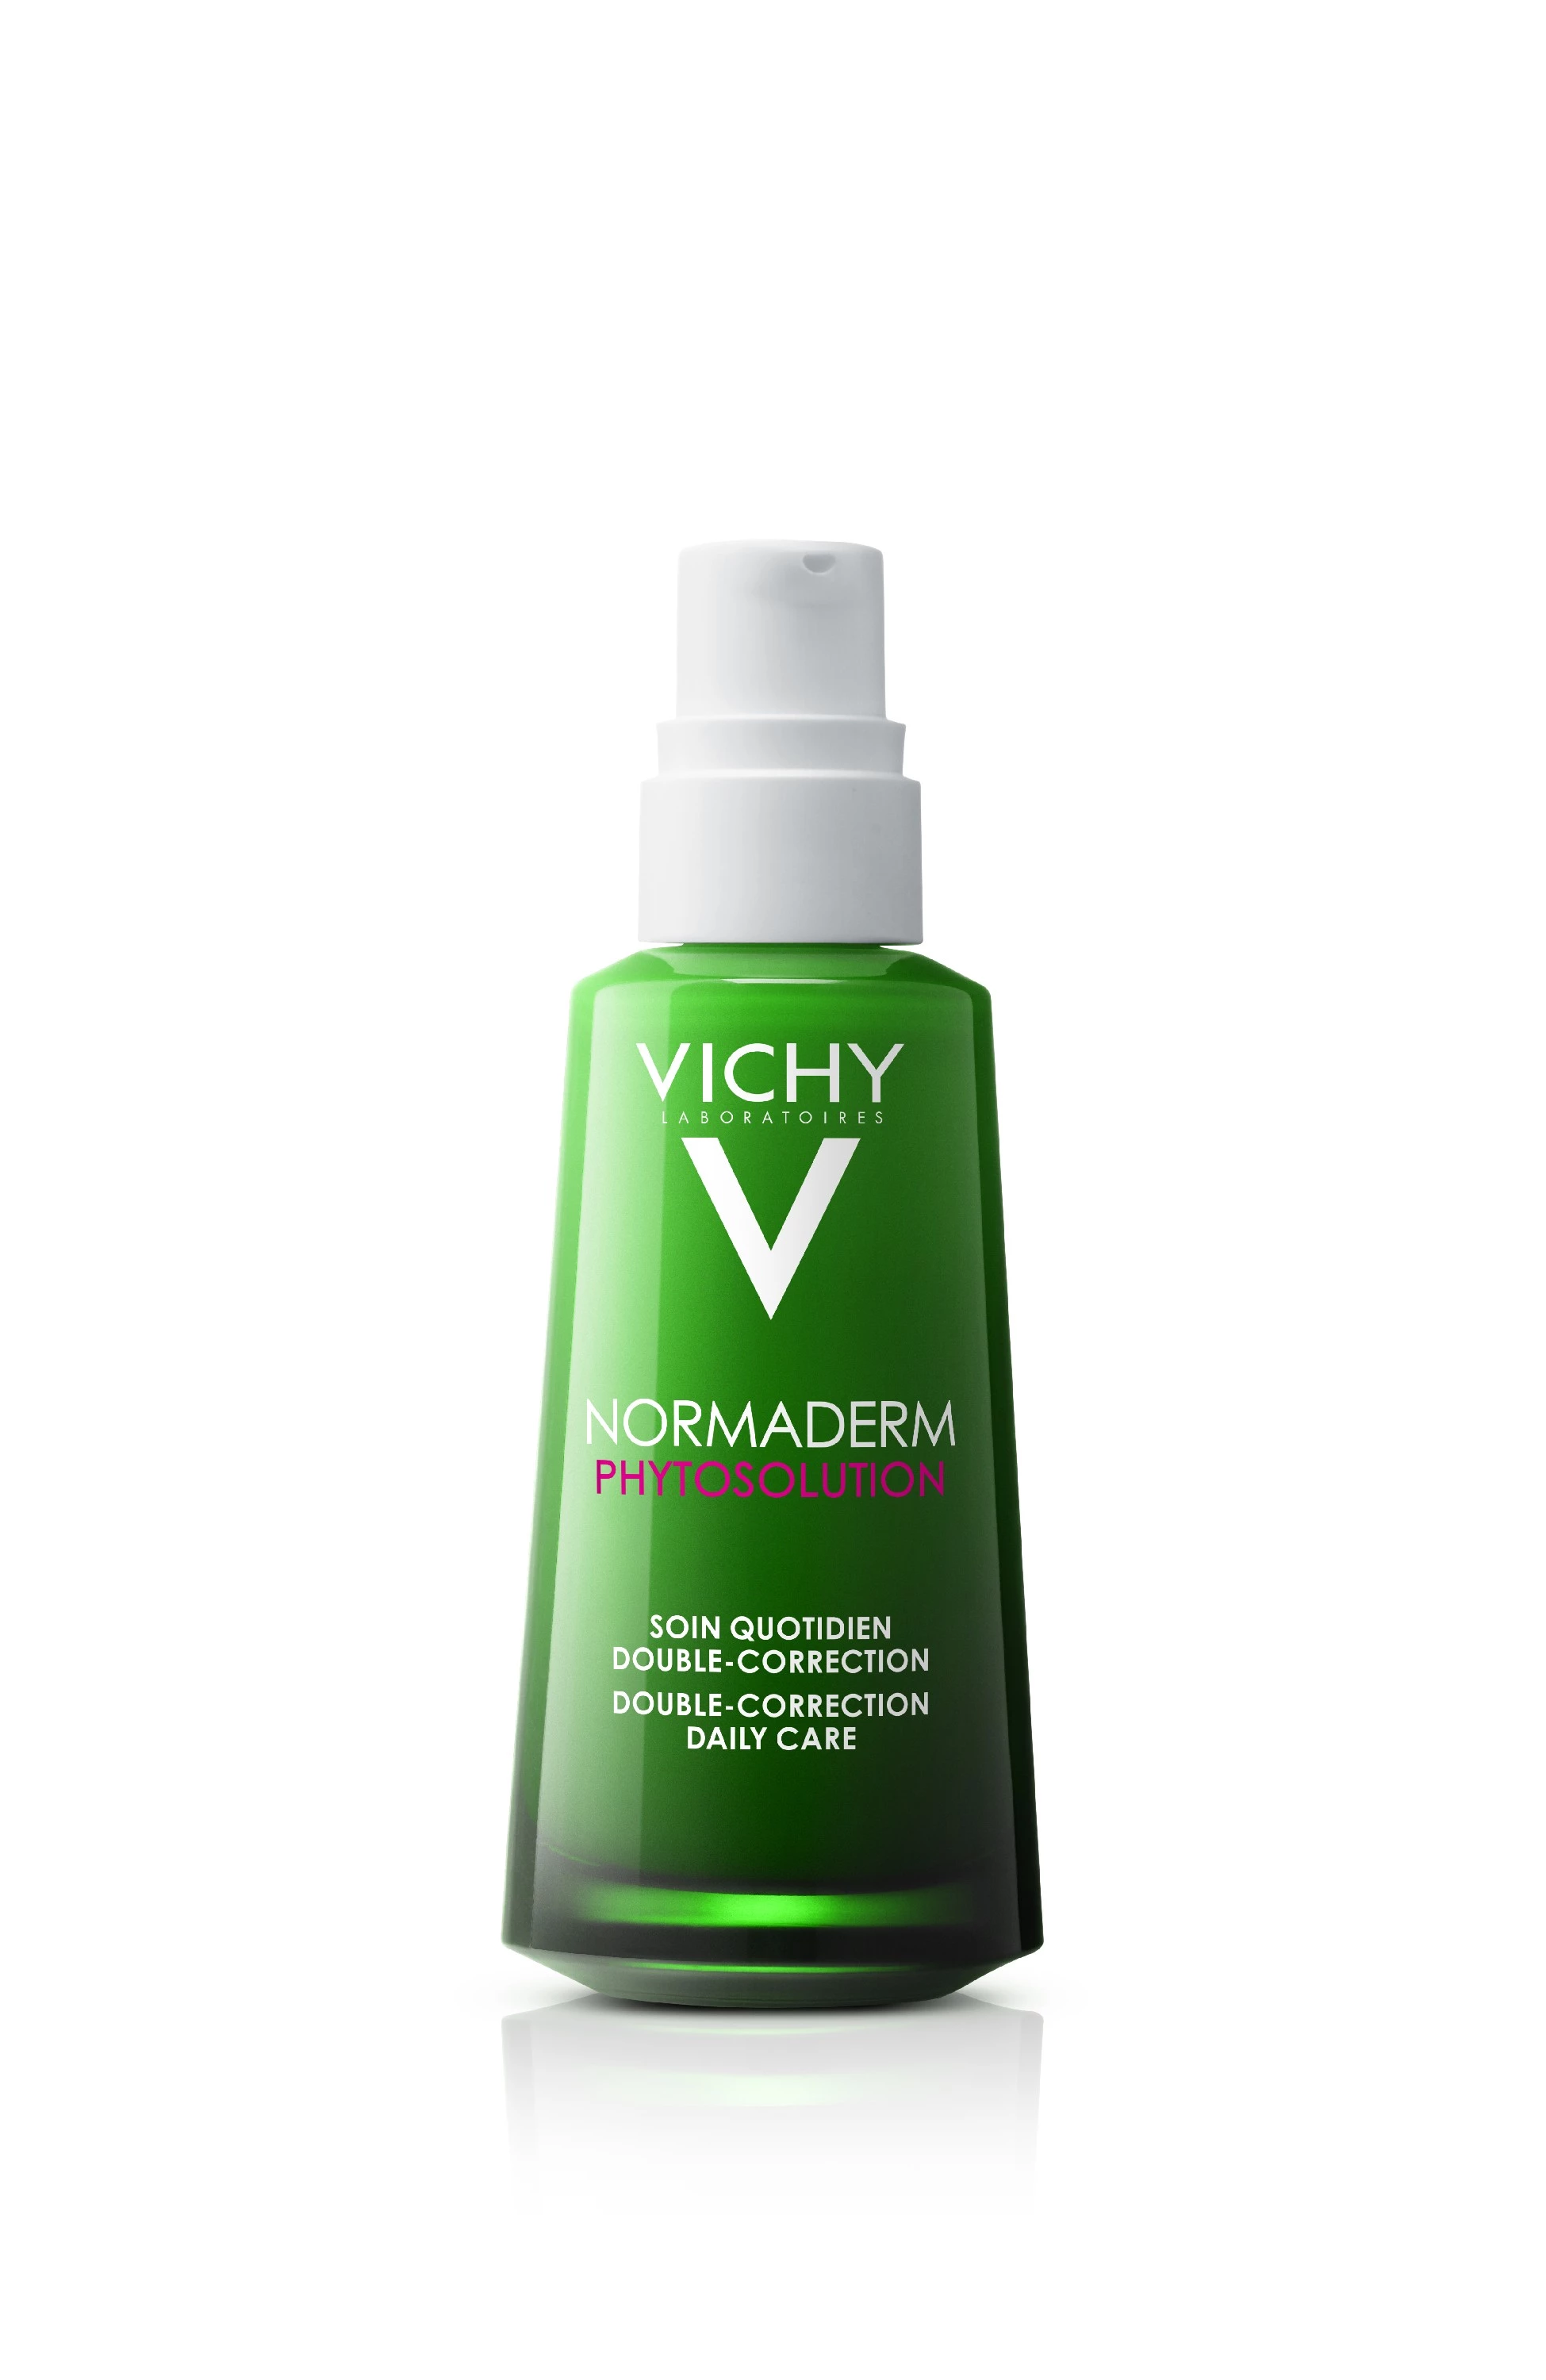 Vichy Normaderm Phytosolution, 50ml.